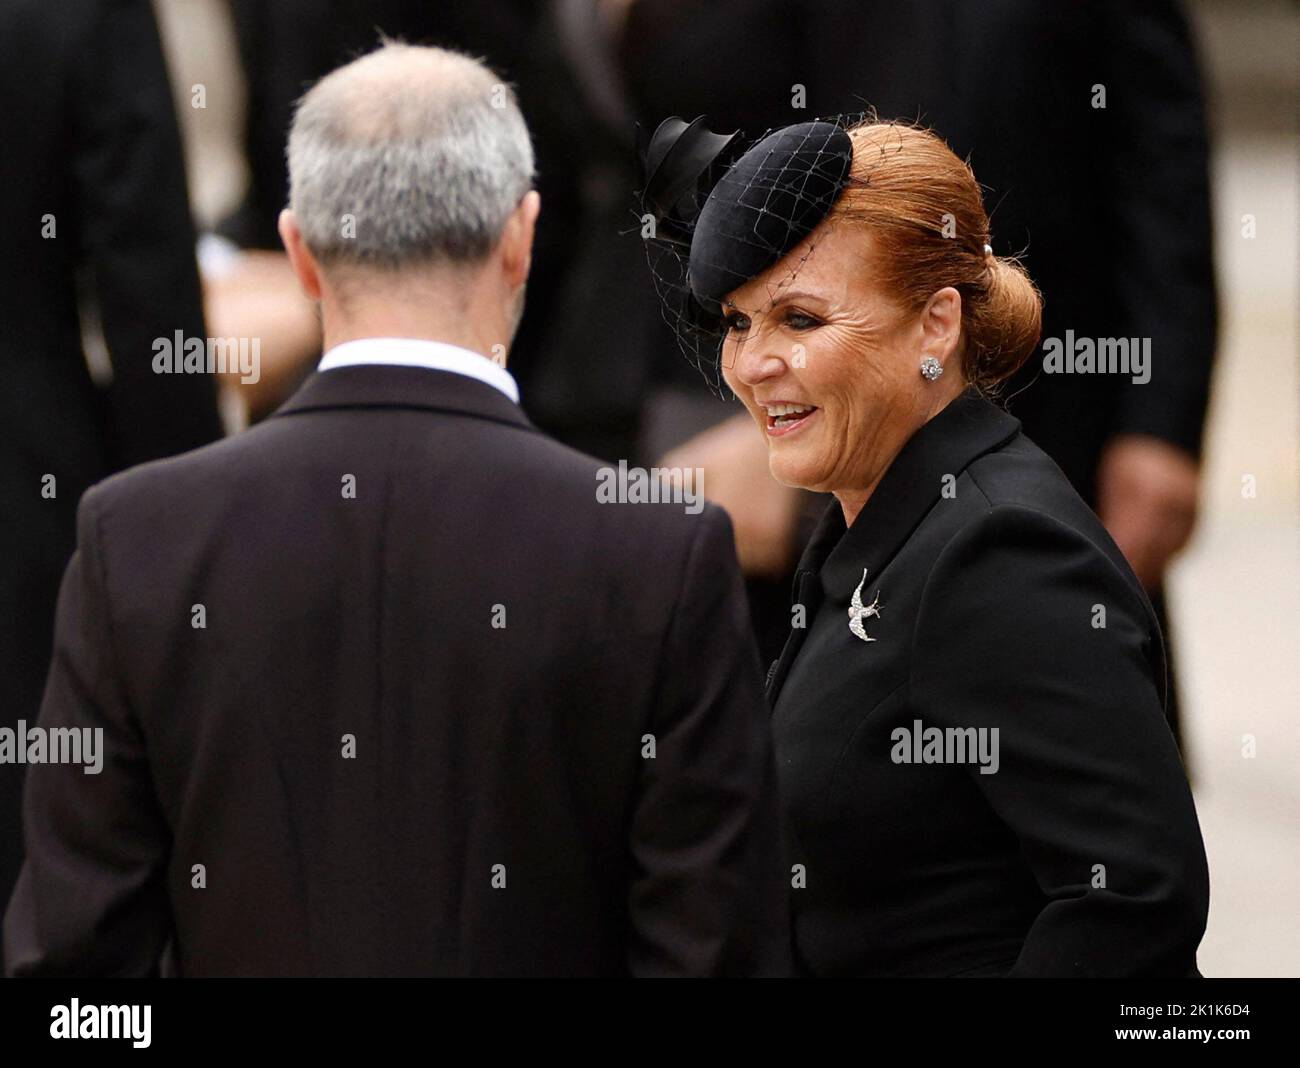 Britain's Sarah, Duchess of York arrives at Westminster Abbey on the day of state funeral and burial of Britain's Queen Elizabeth, in London, Britain, September 19, 2022 REUTERS/John Sibley Stock Photo